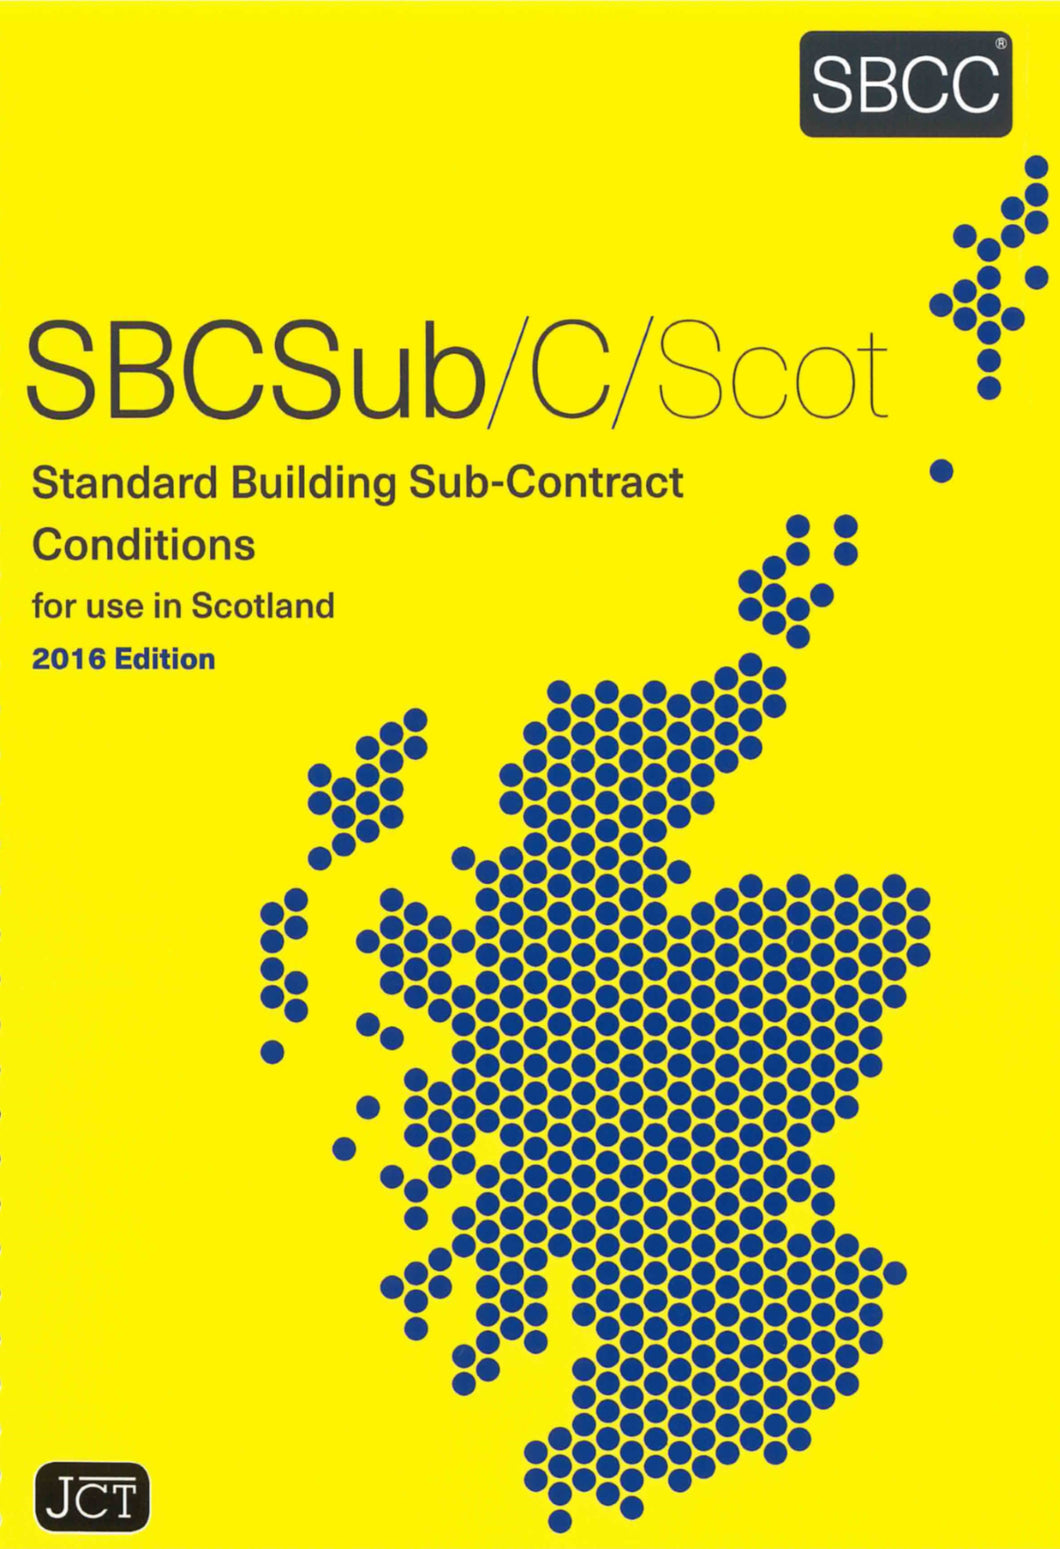 Standard Building Sub-Contract Conditions for use in Scotland 2016